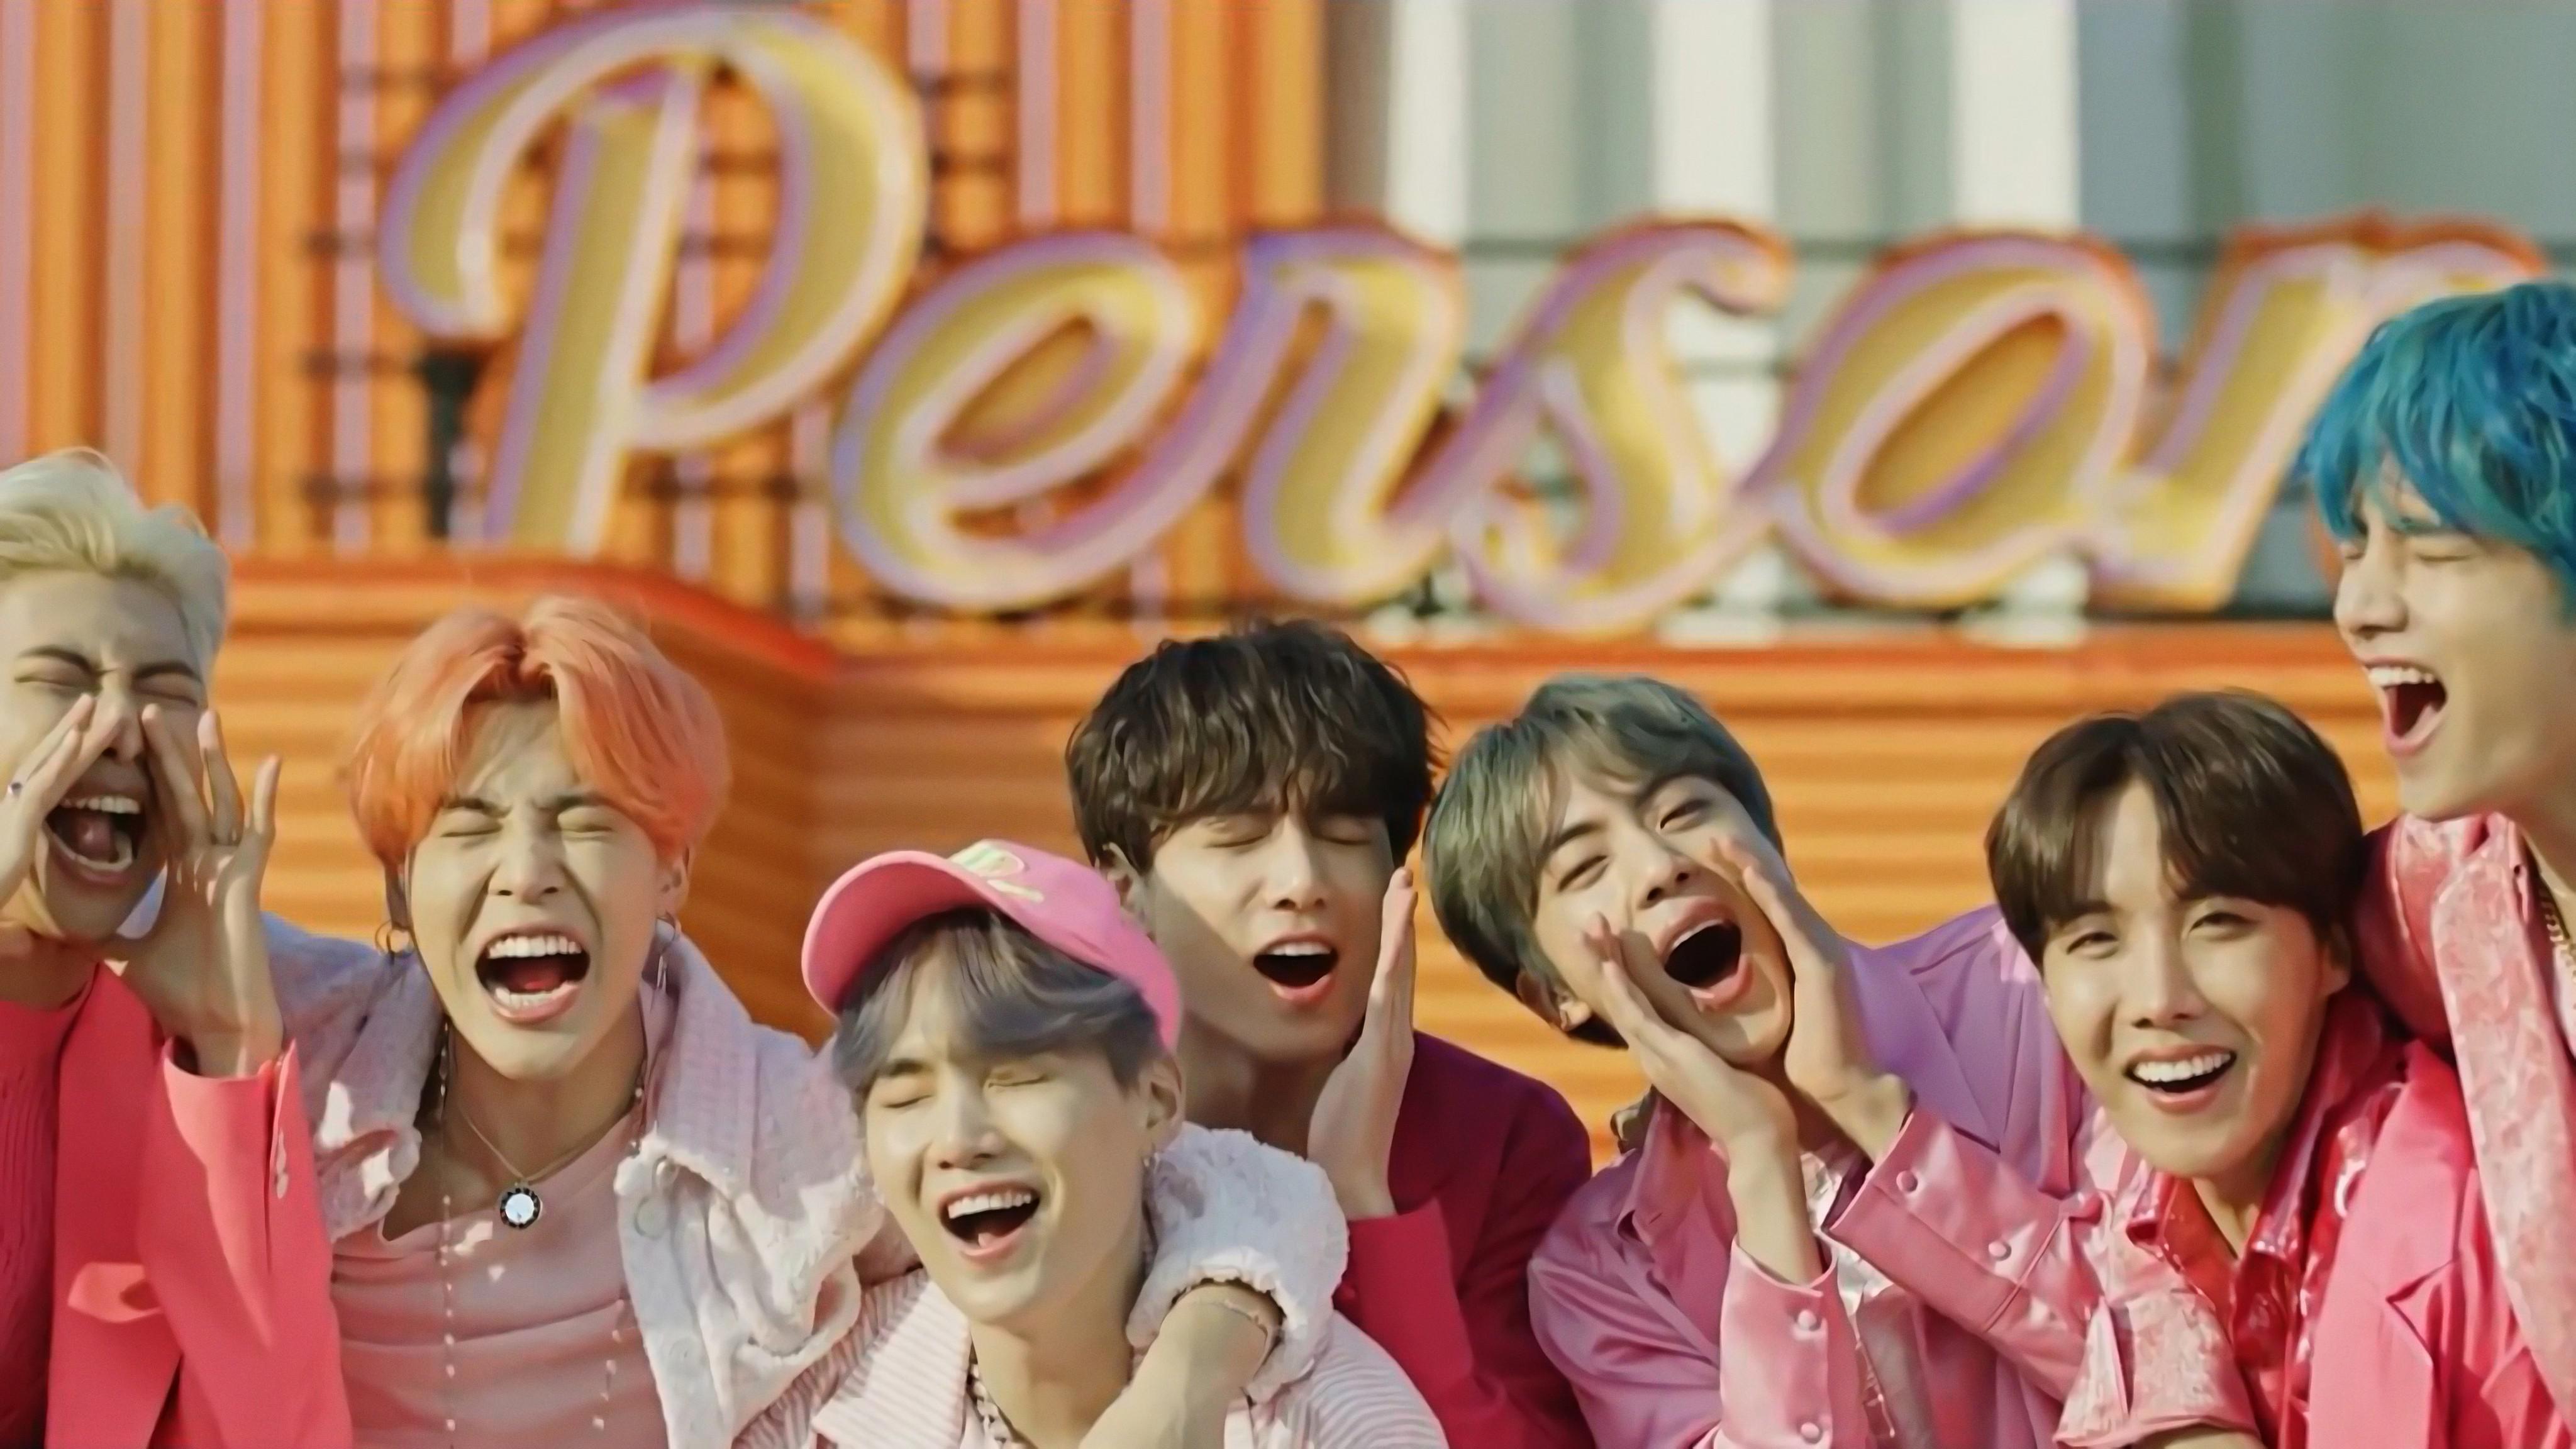 БТС boy with Luv